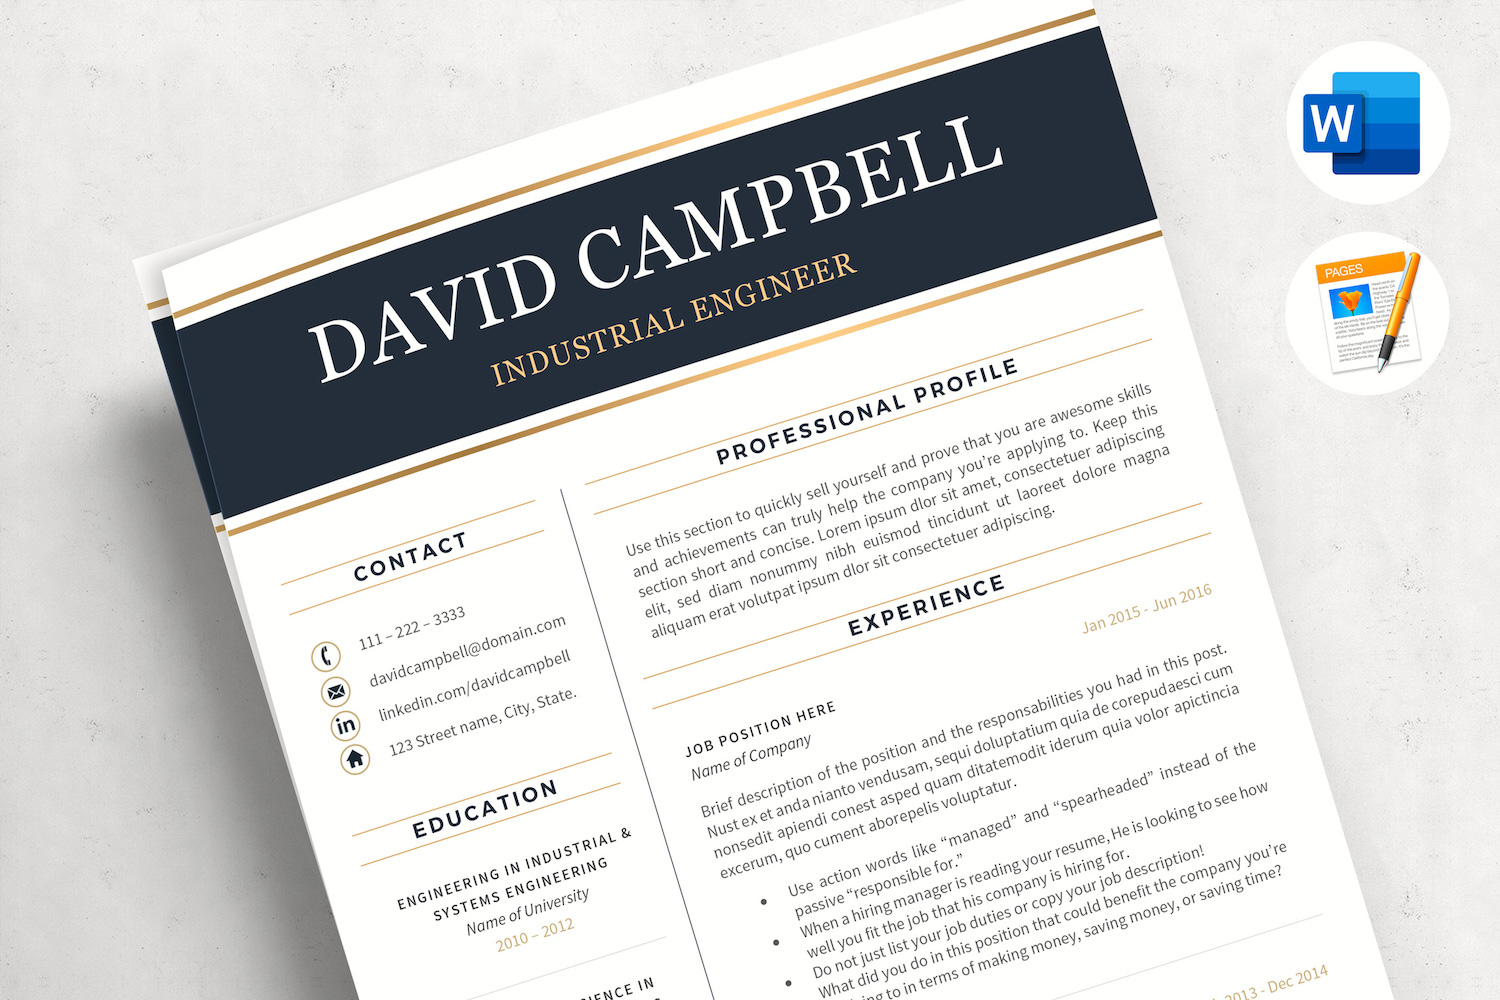 DAVID - Professional Resume  for Engineers. Engineering Resume with Cover Letter & References